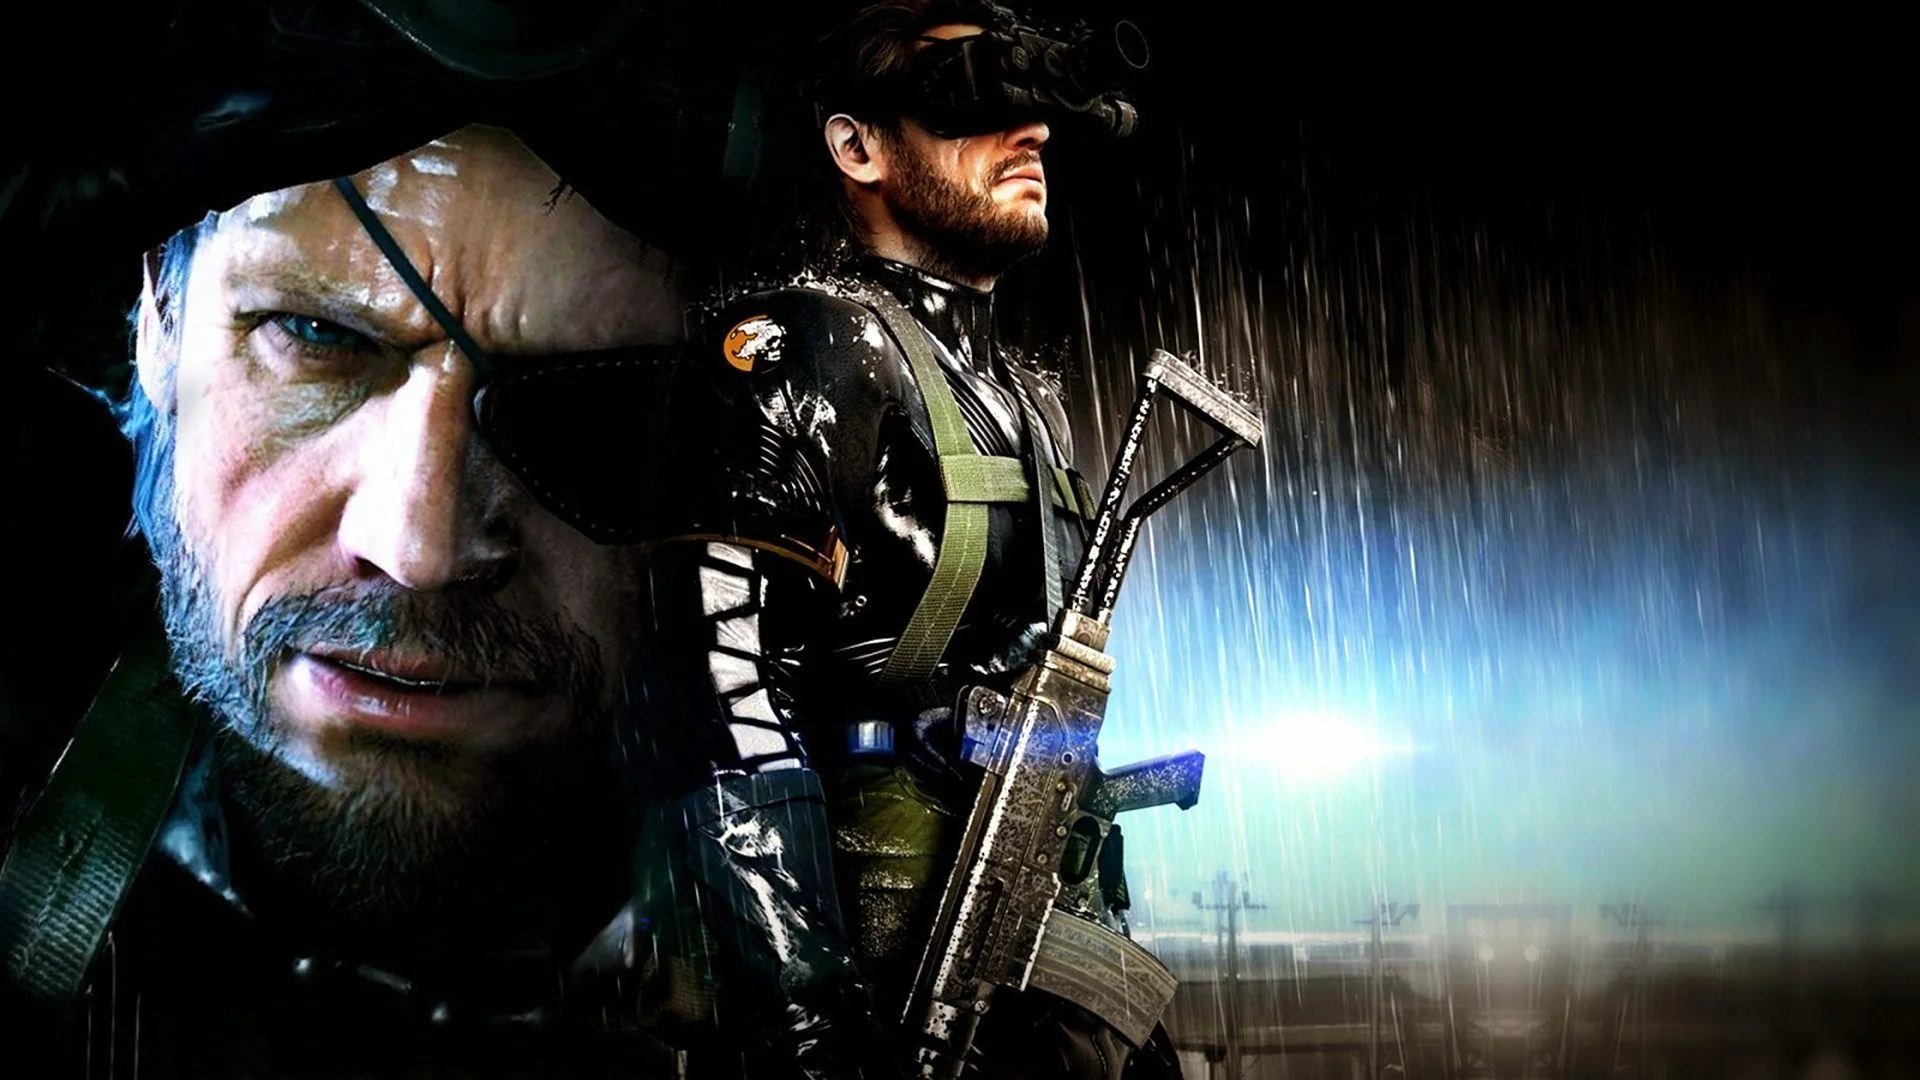 Metal Gear Solid 5: The Phantom Pain Wallpapers, Pictures, Images